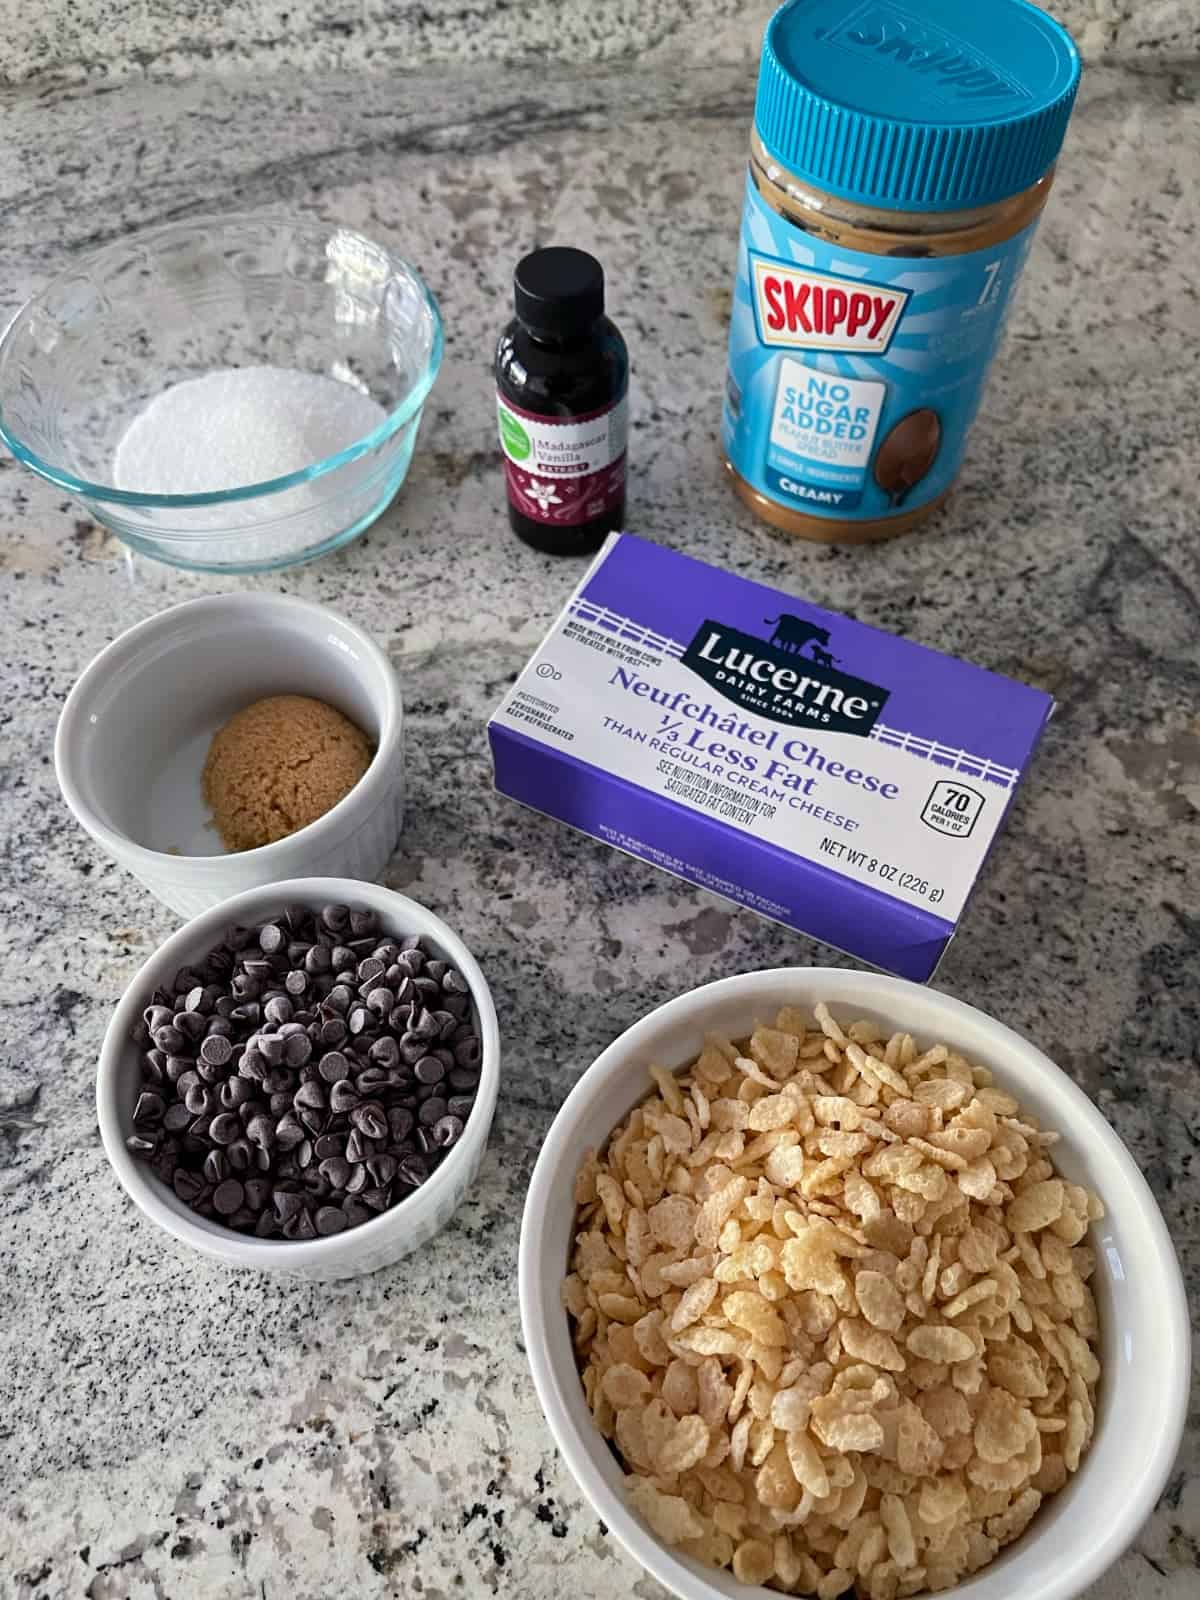 Ingredients including crispy rice cereal, mini chocolate chips, Truvia brown sugar, light cream cheese, vanilla and jar of peanut butter.